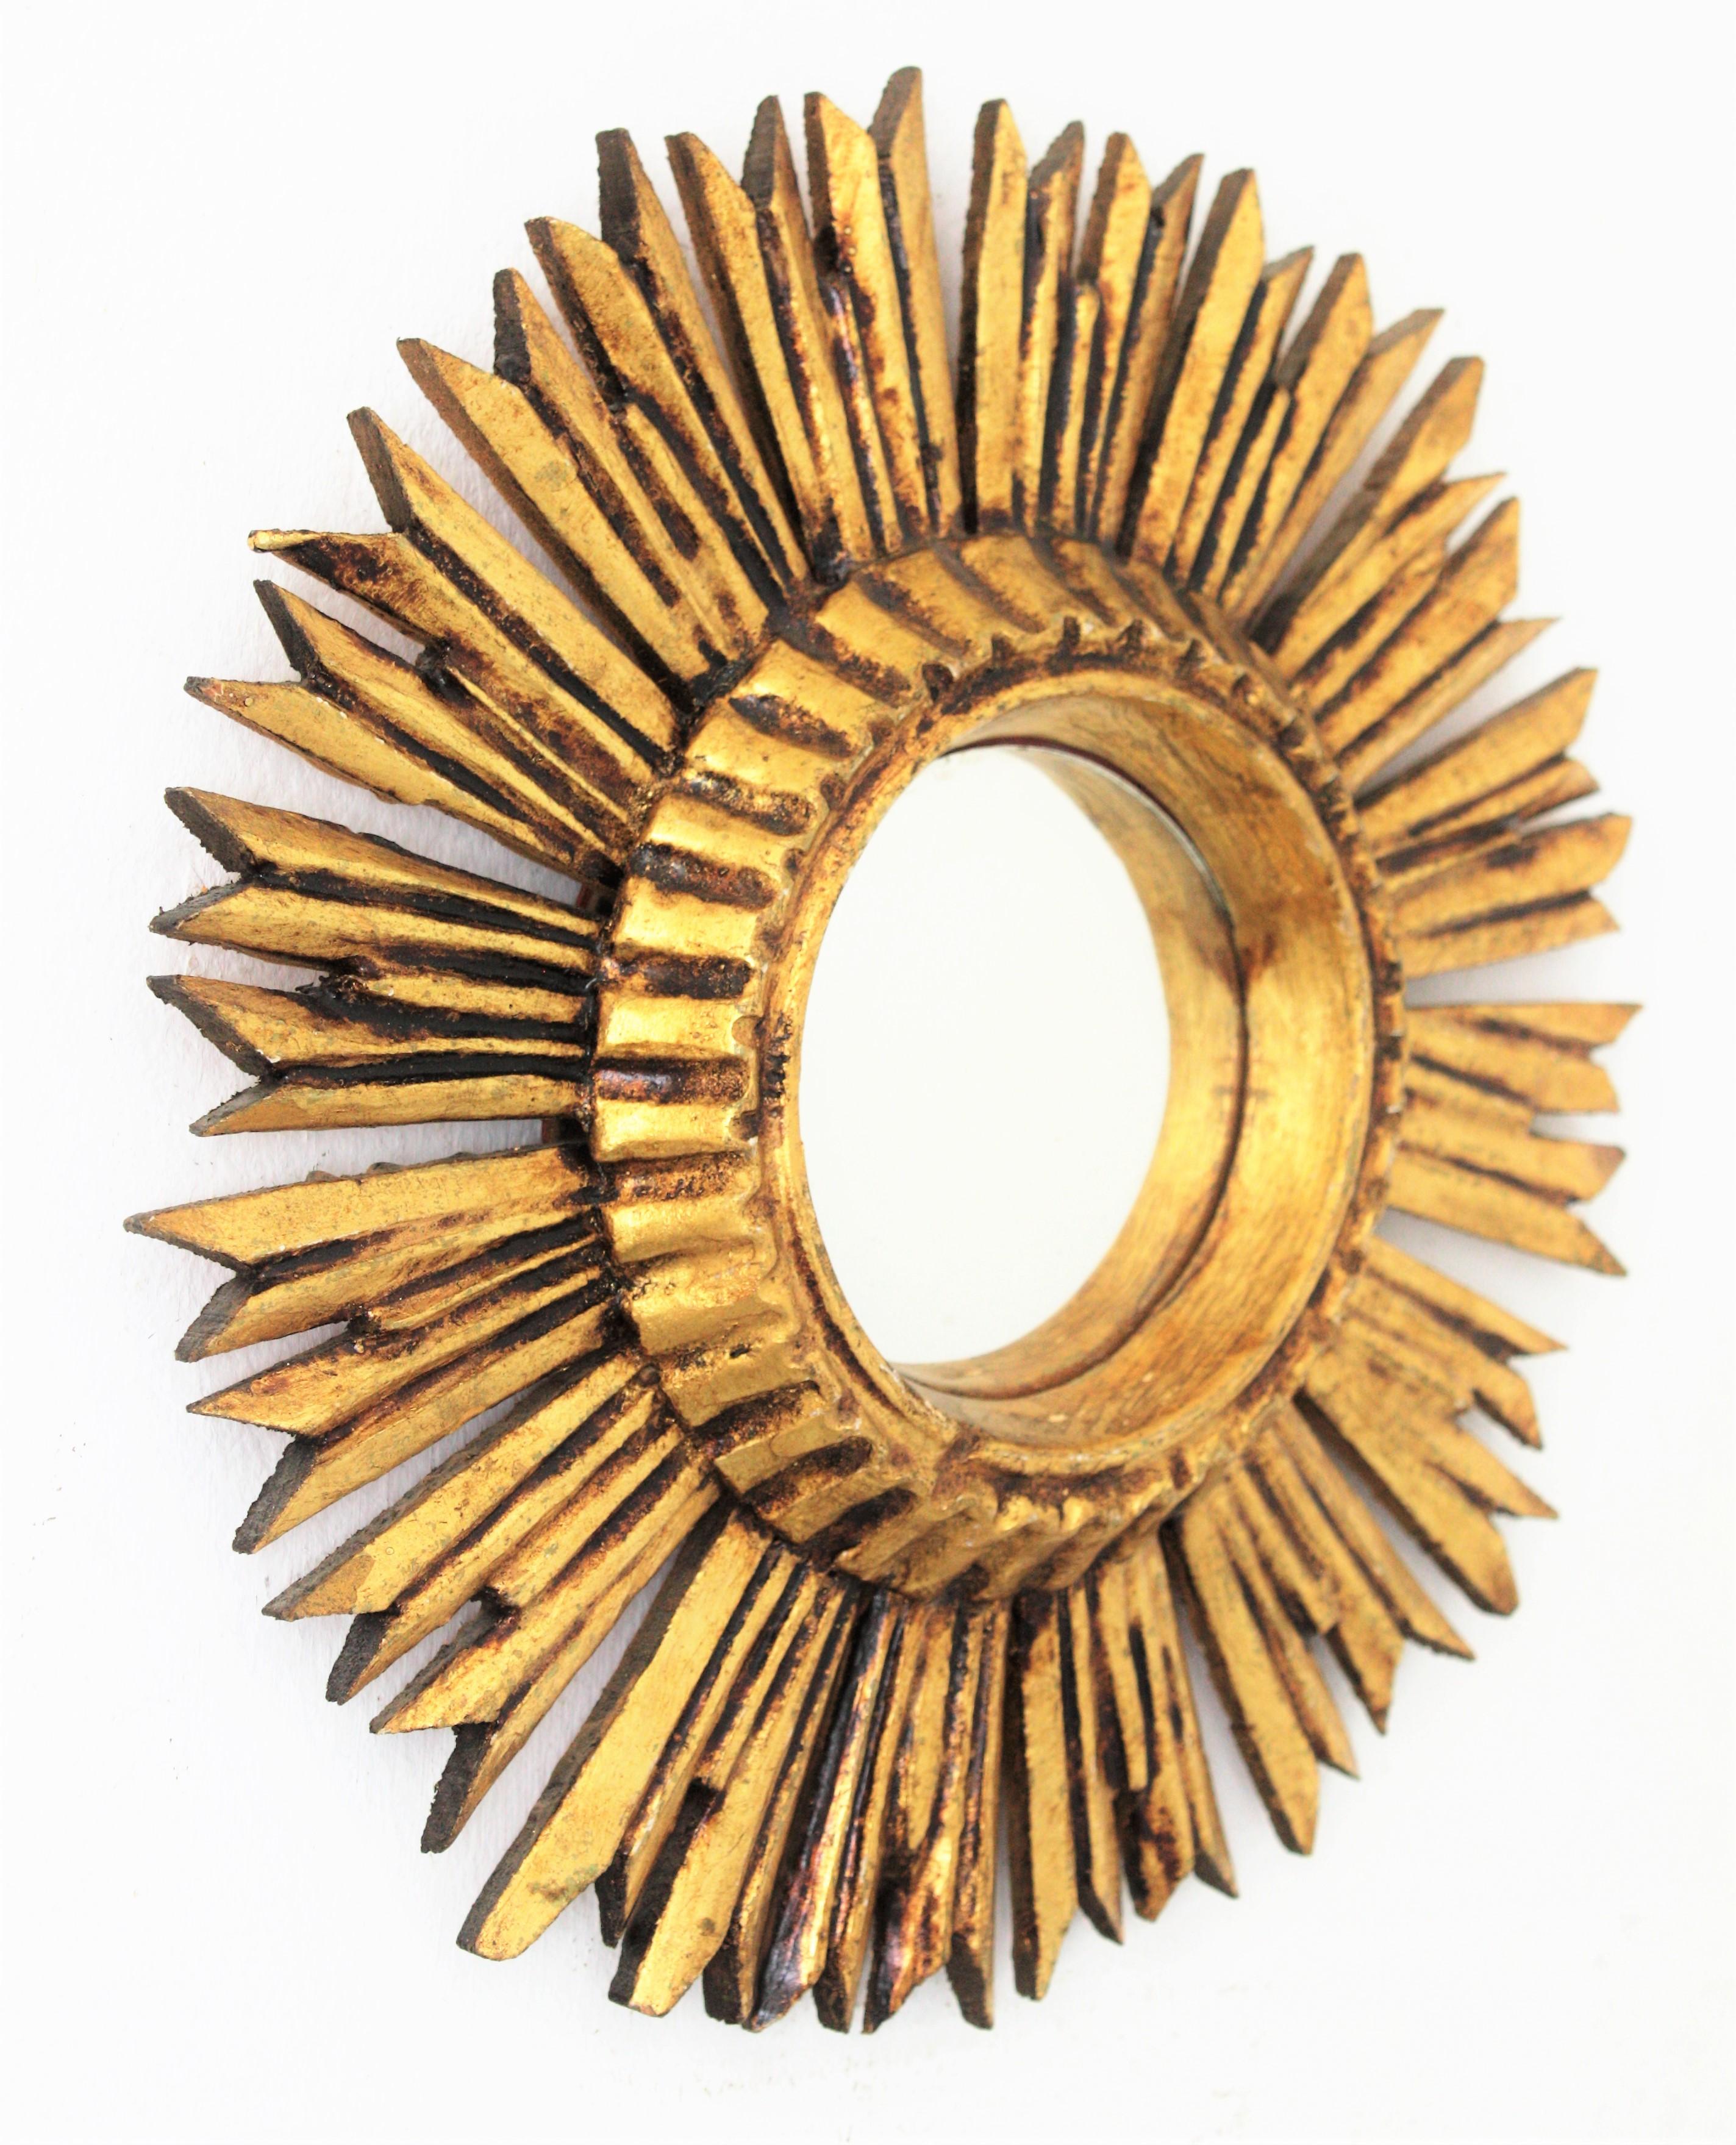 Mini sized carved giltwood convex sunburst mirror, France, 1940s
This lovely French petite giltwood sunburst mirror with convex glass has a beautiful patina.
Place it alone or as a part of a sunburst mirrors wall composition with other mirrors in